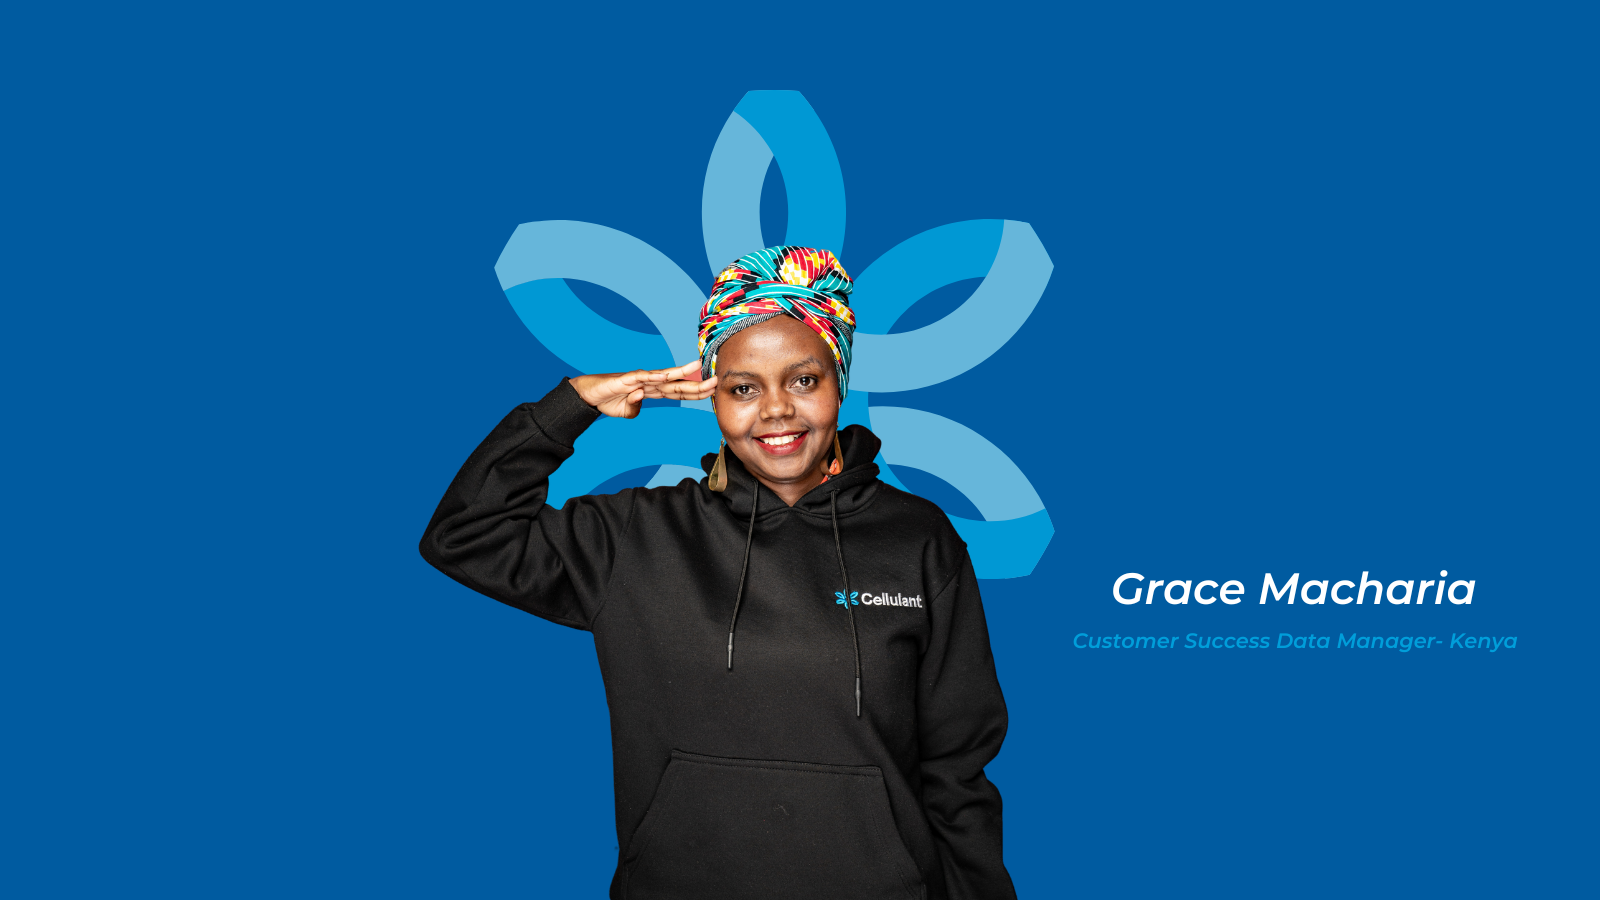 Grace Macharia-Translating Data To Deliver On Customer Delight Whatever It Takes